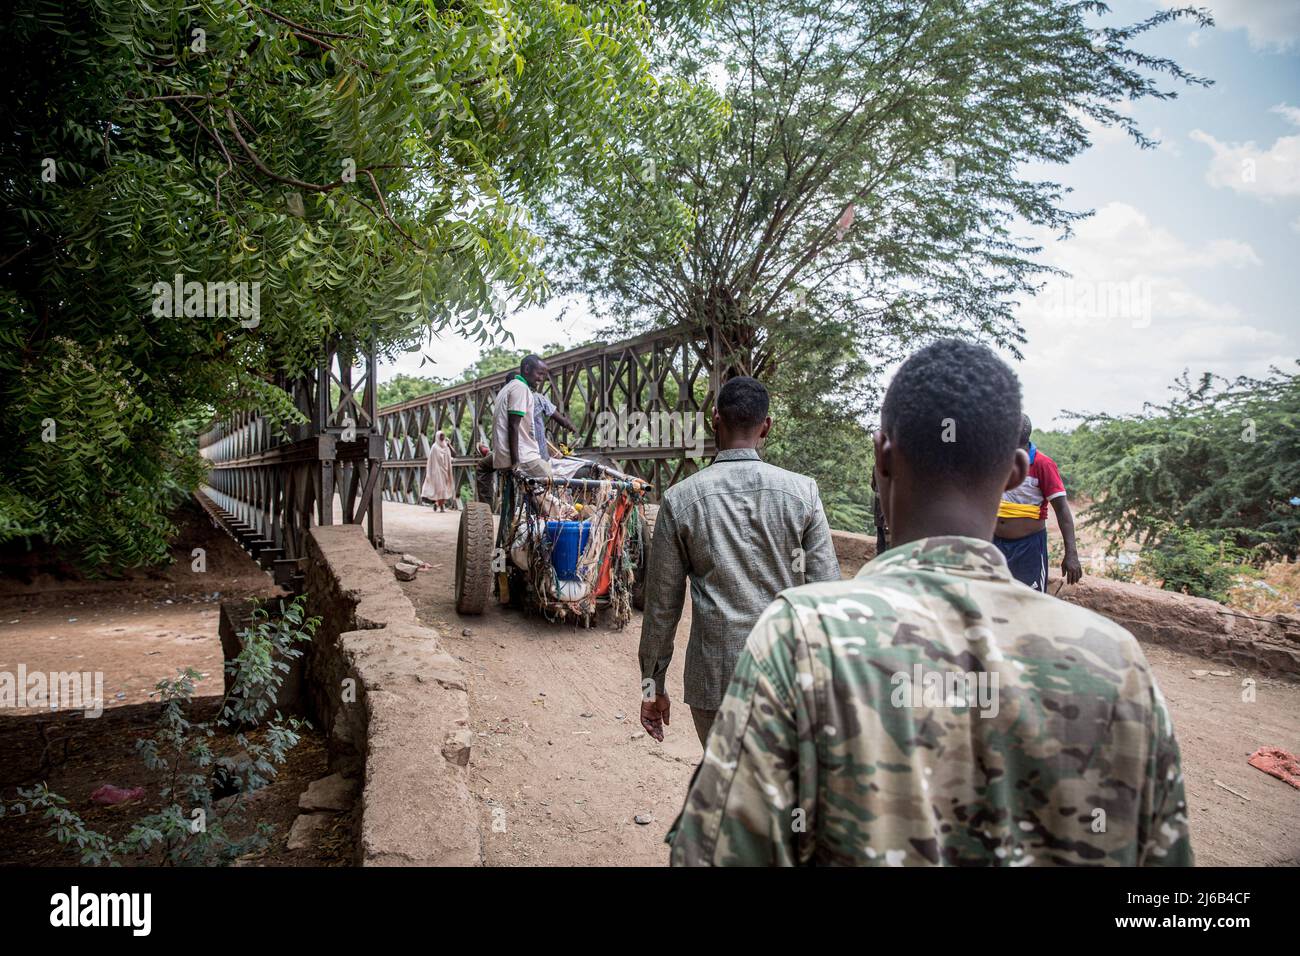 Soldiers and tradespeople cross the dried up Jubba River in Dollow, Jubaland, southwest Somalia, on the border with Ethiopia. (Photo by Sally Hayden / SOPA Images/Sipa USA) Stock Photo